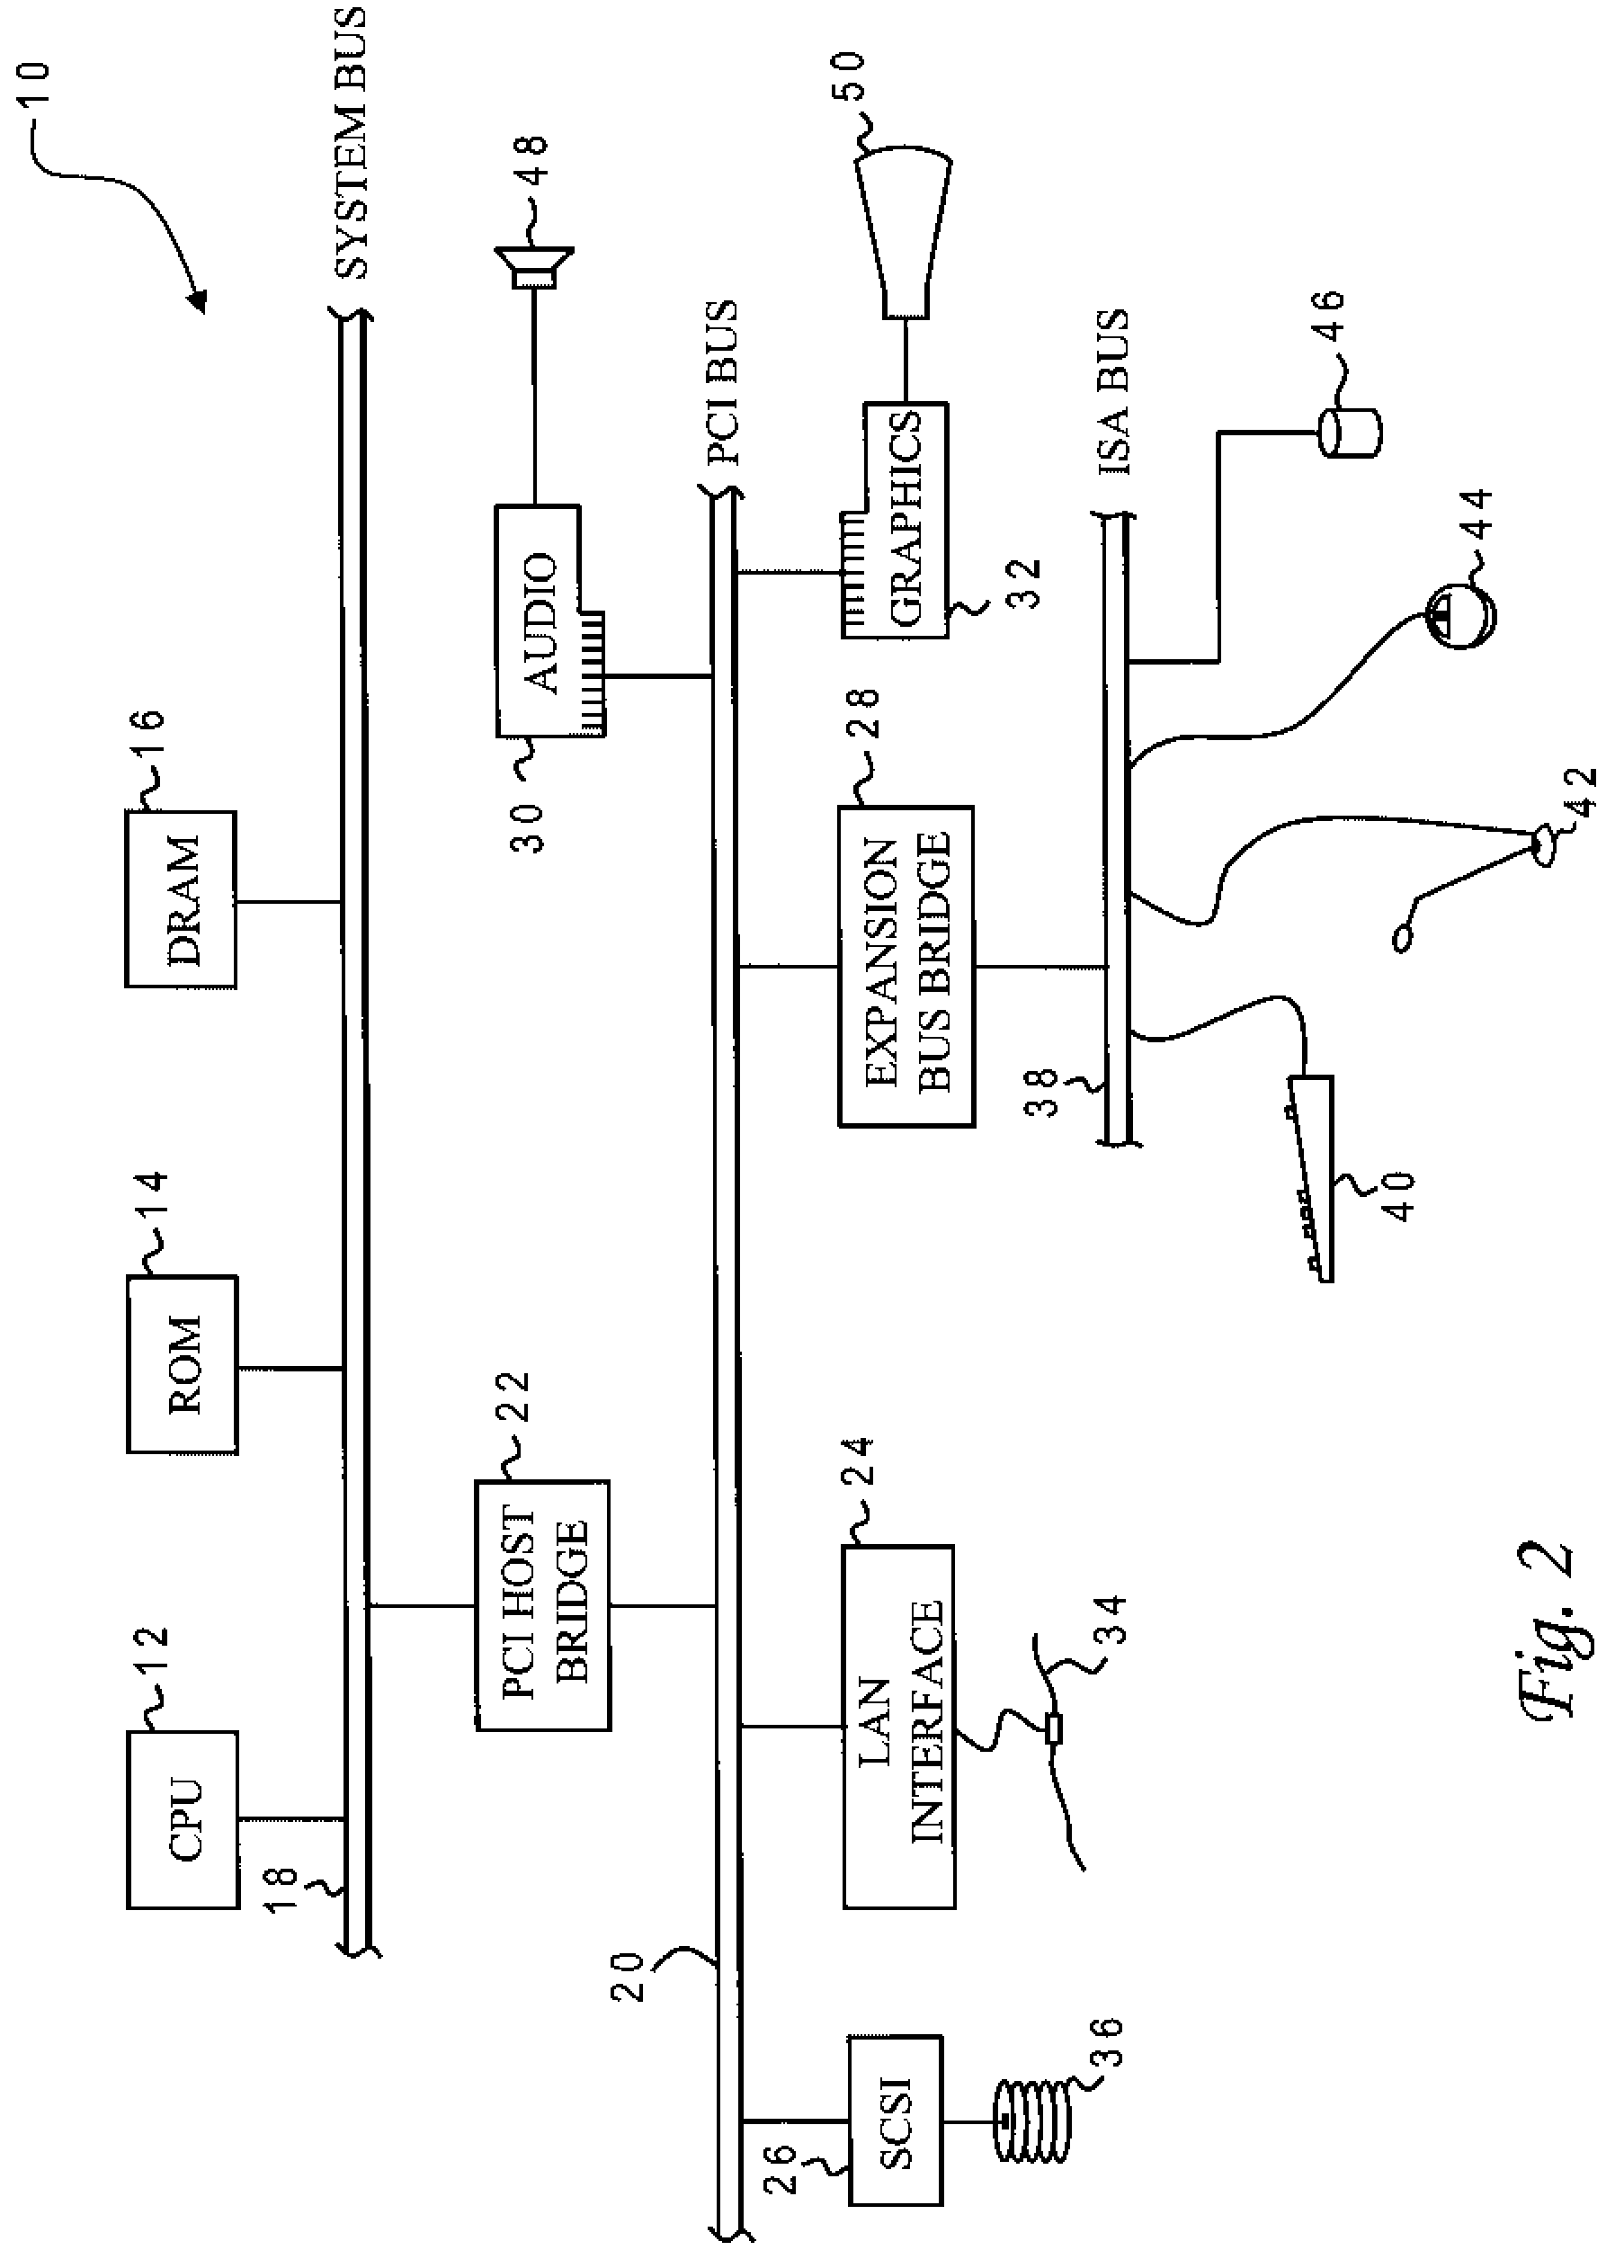 Latch placement for high performance and low power circuits